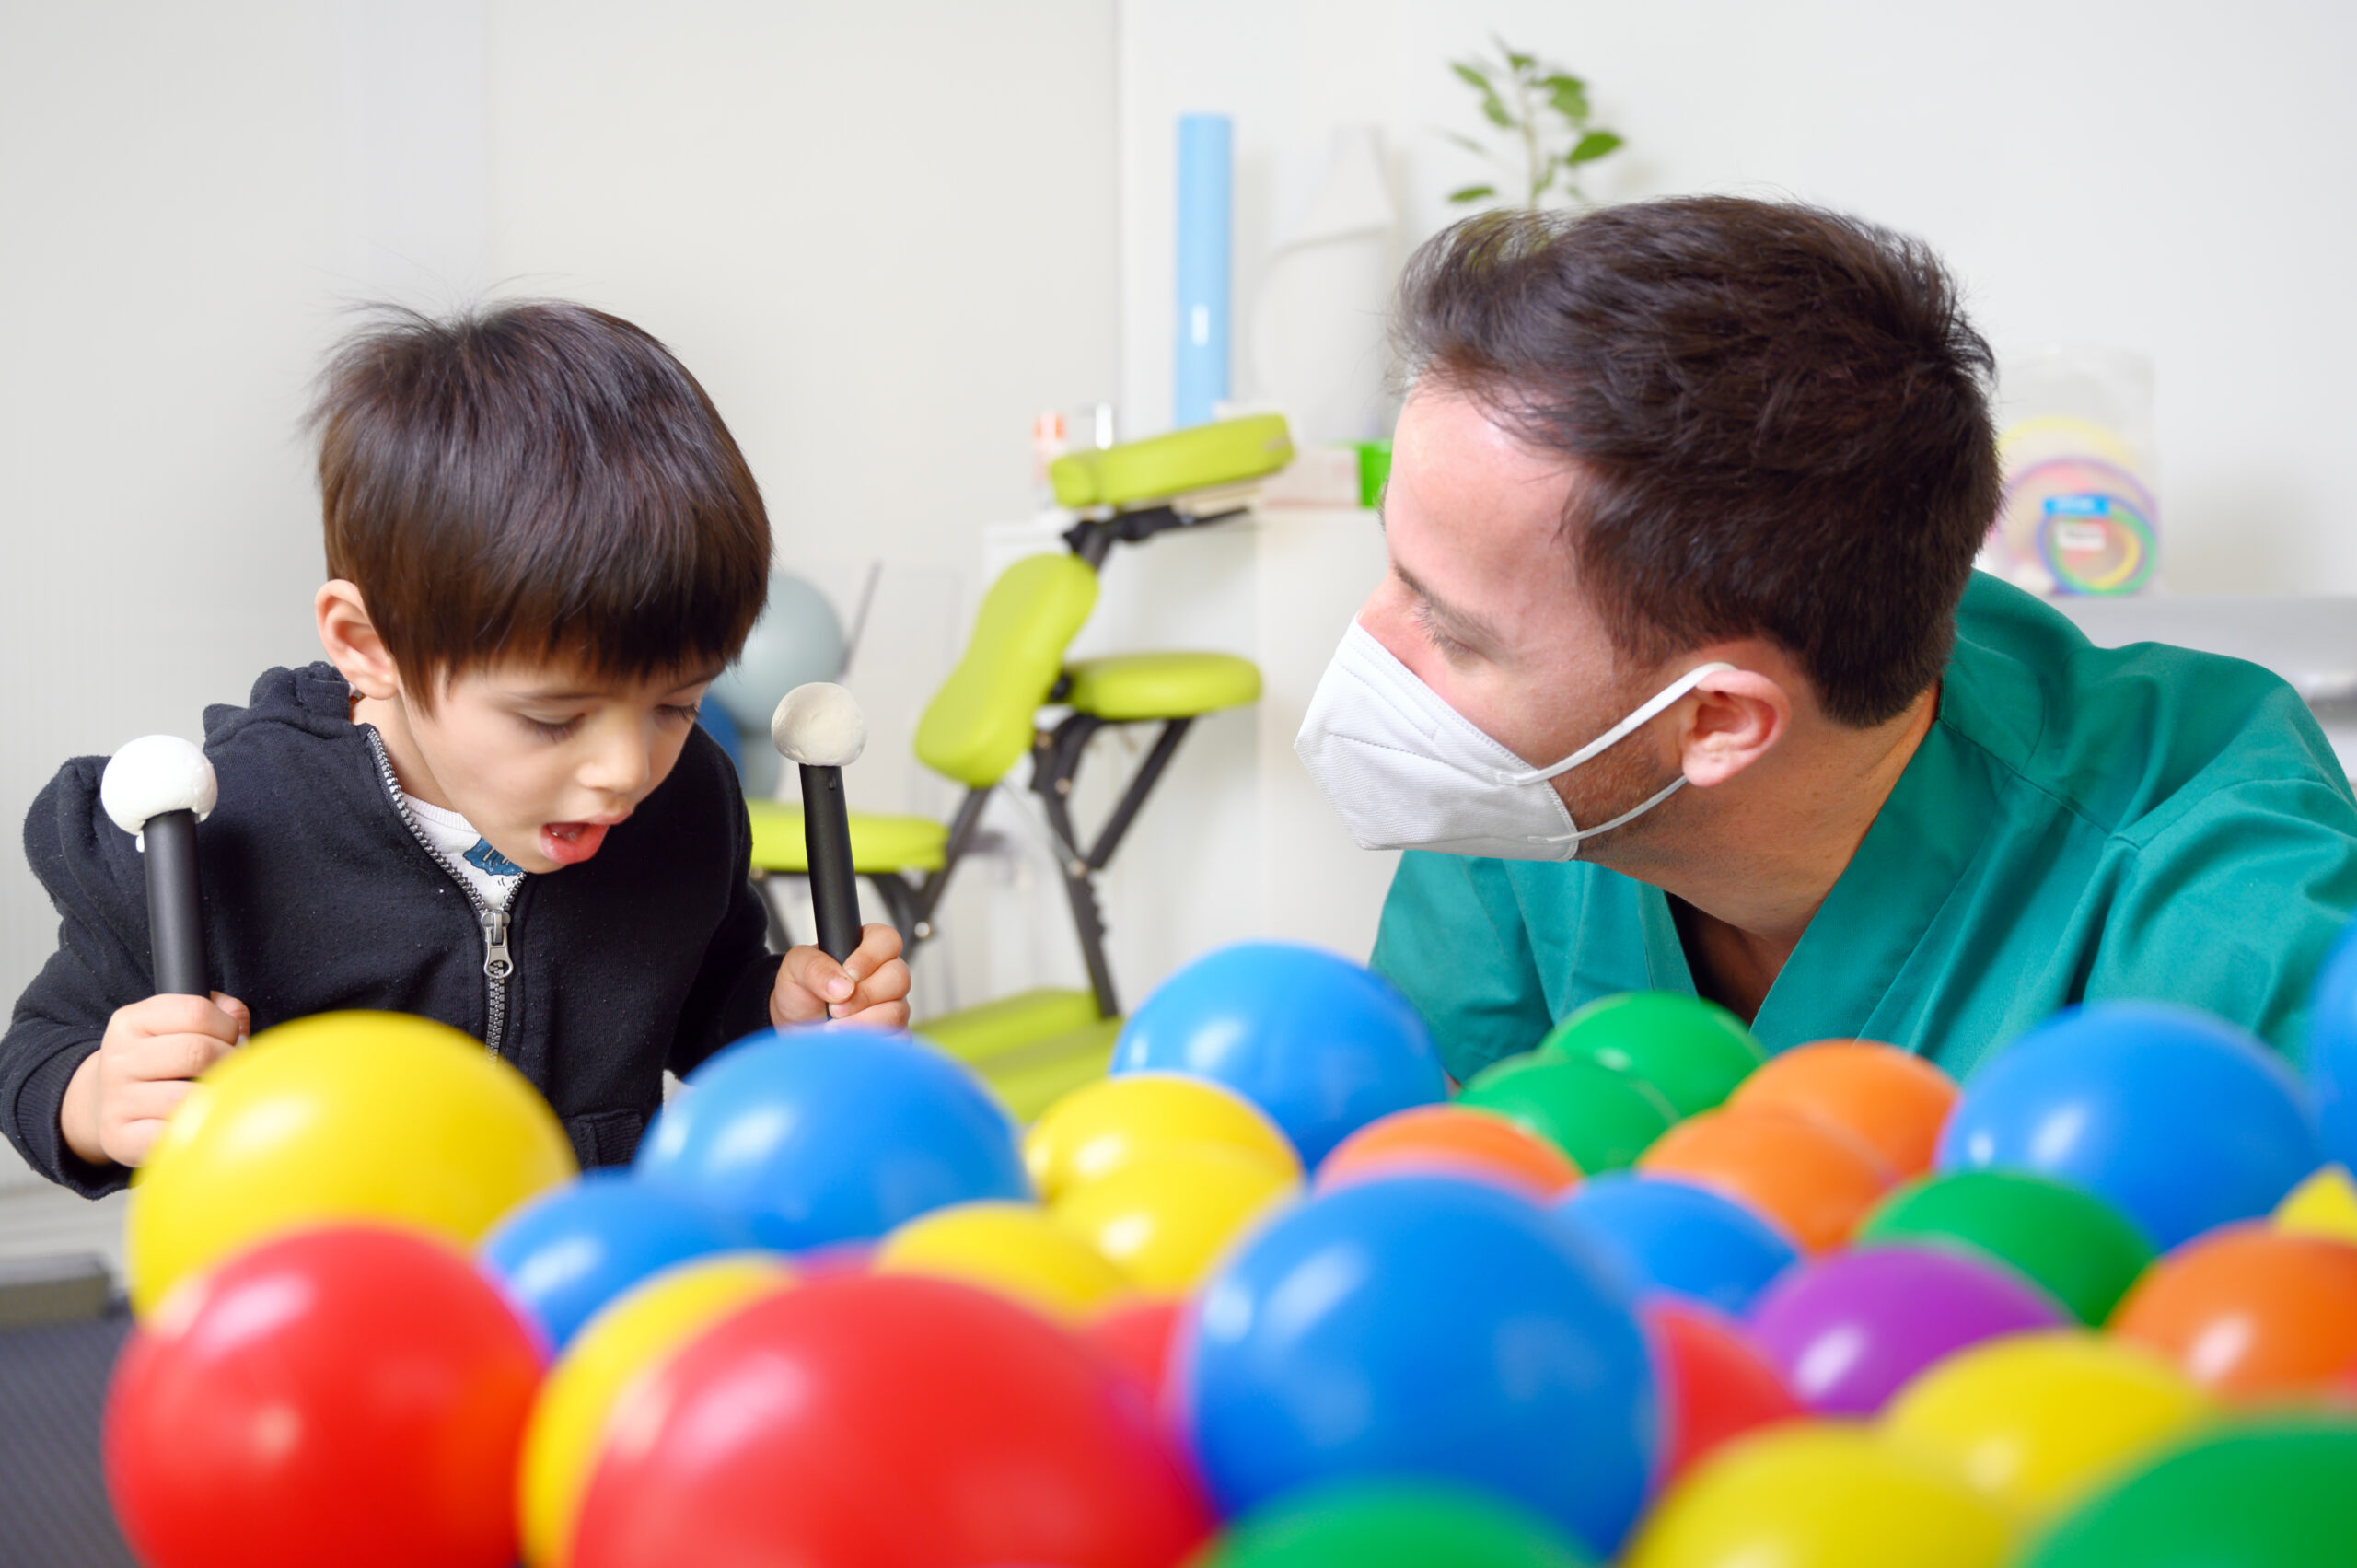 Therapist in facemask with boy with cerebral palsy behind colourful plastic balls